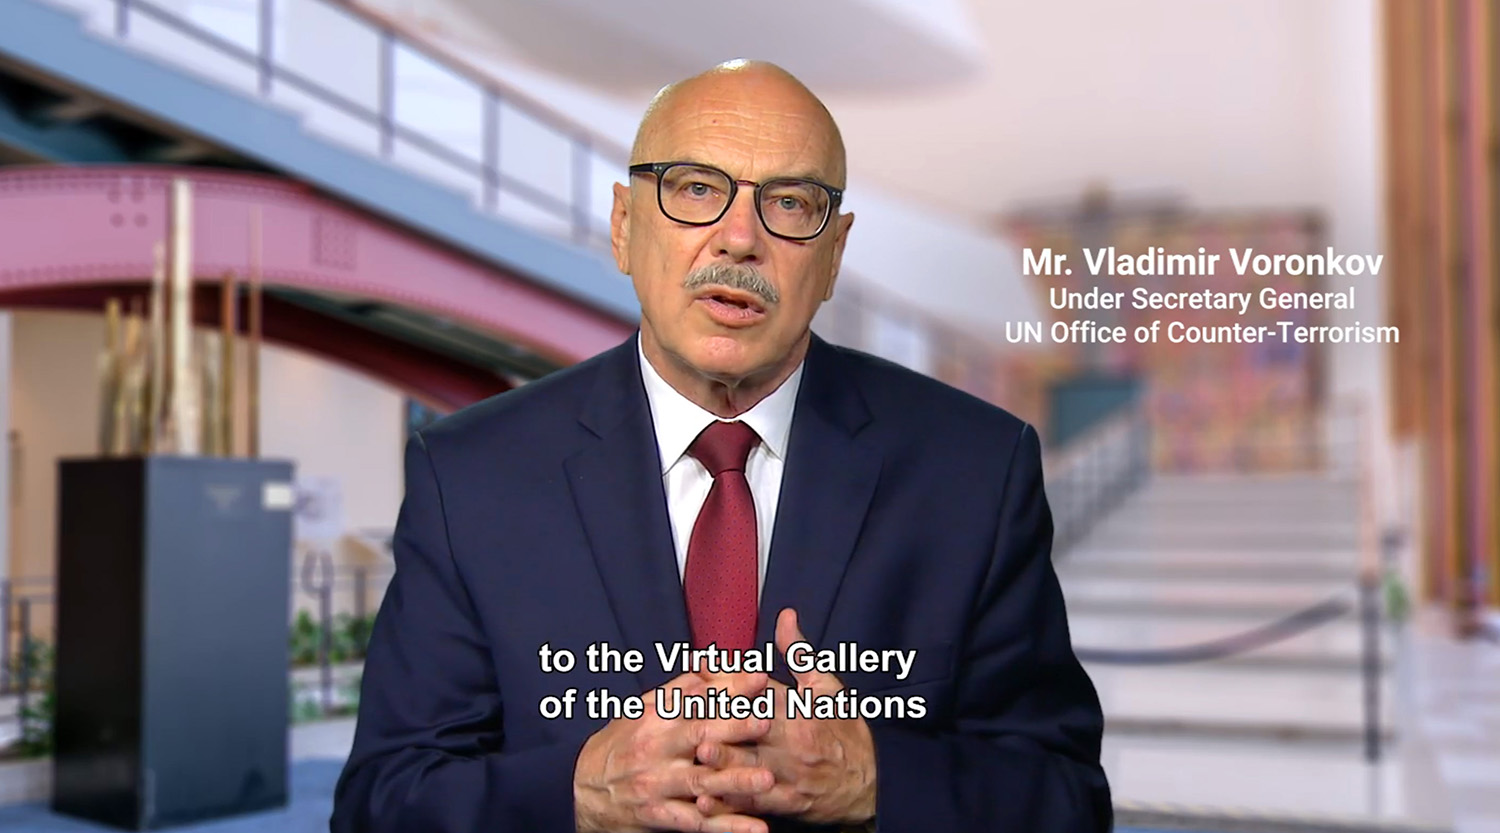 United Nations Virtual Exhibition